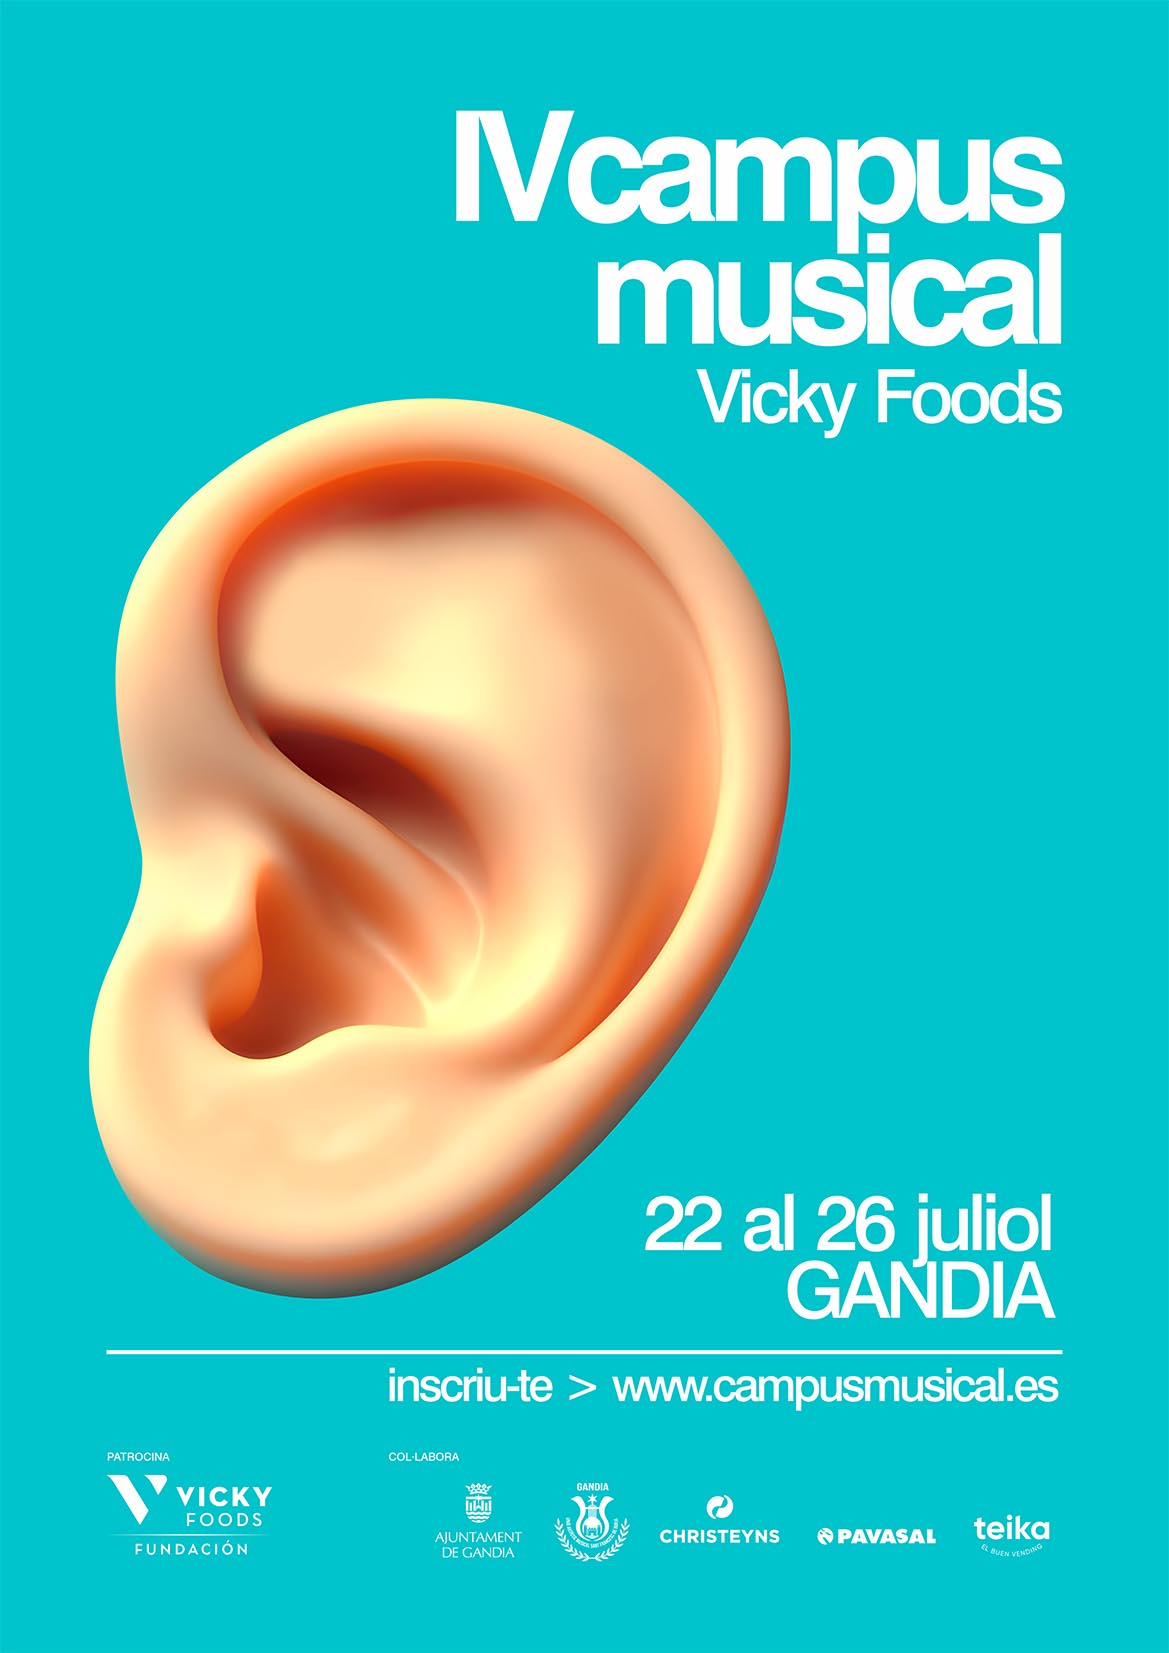 Campaña Form-Art-e IV CAMPUS MUSICAL VICKY FOODS